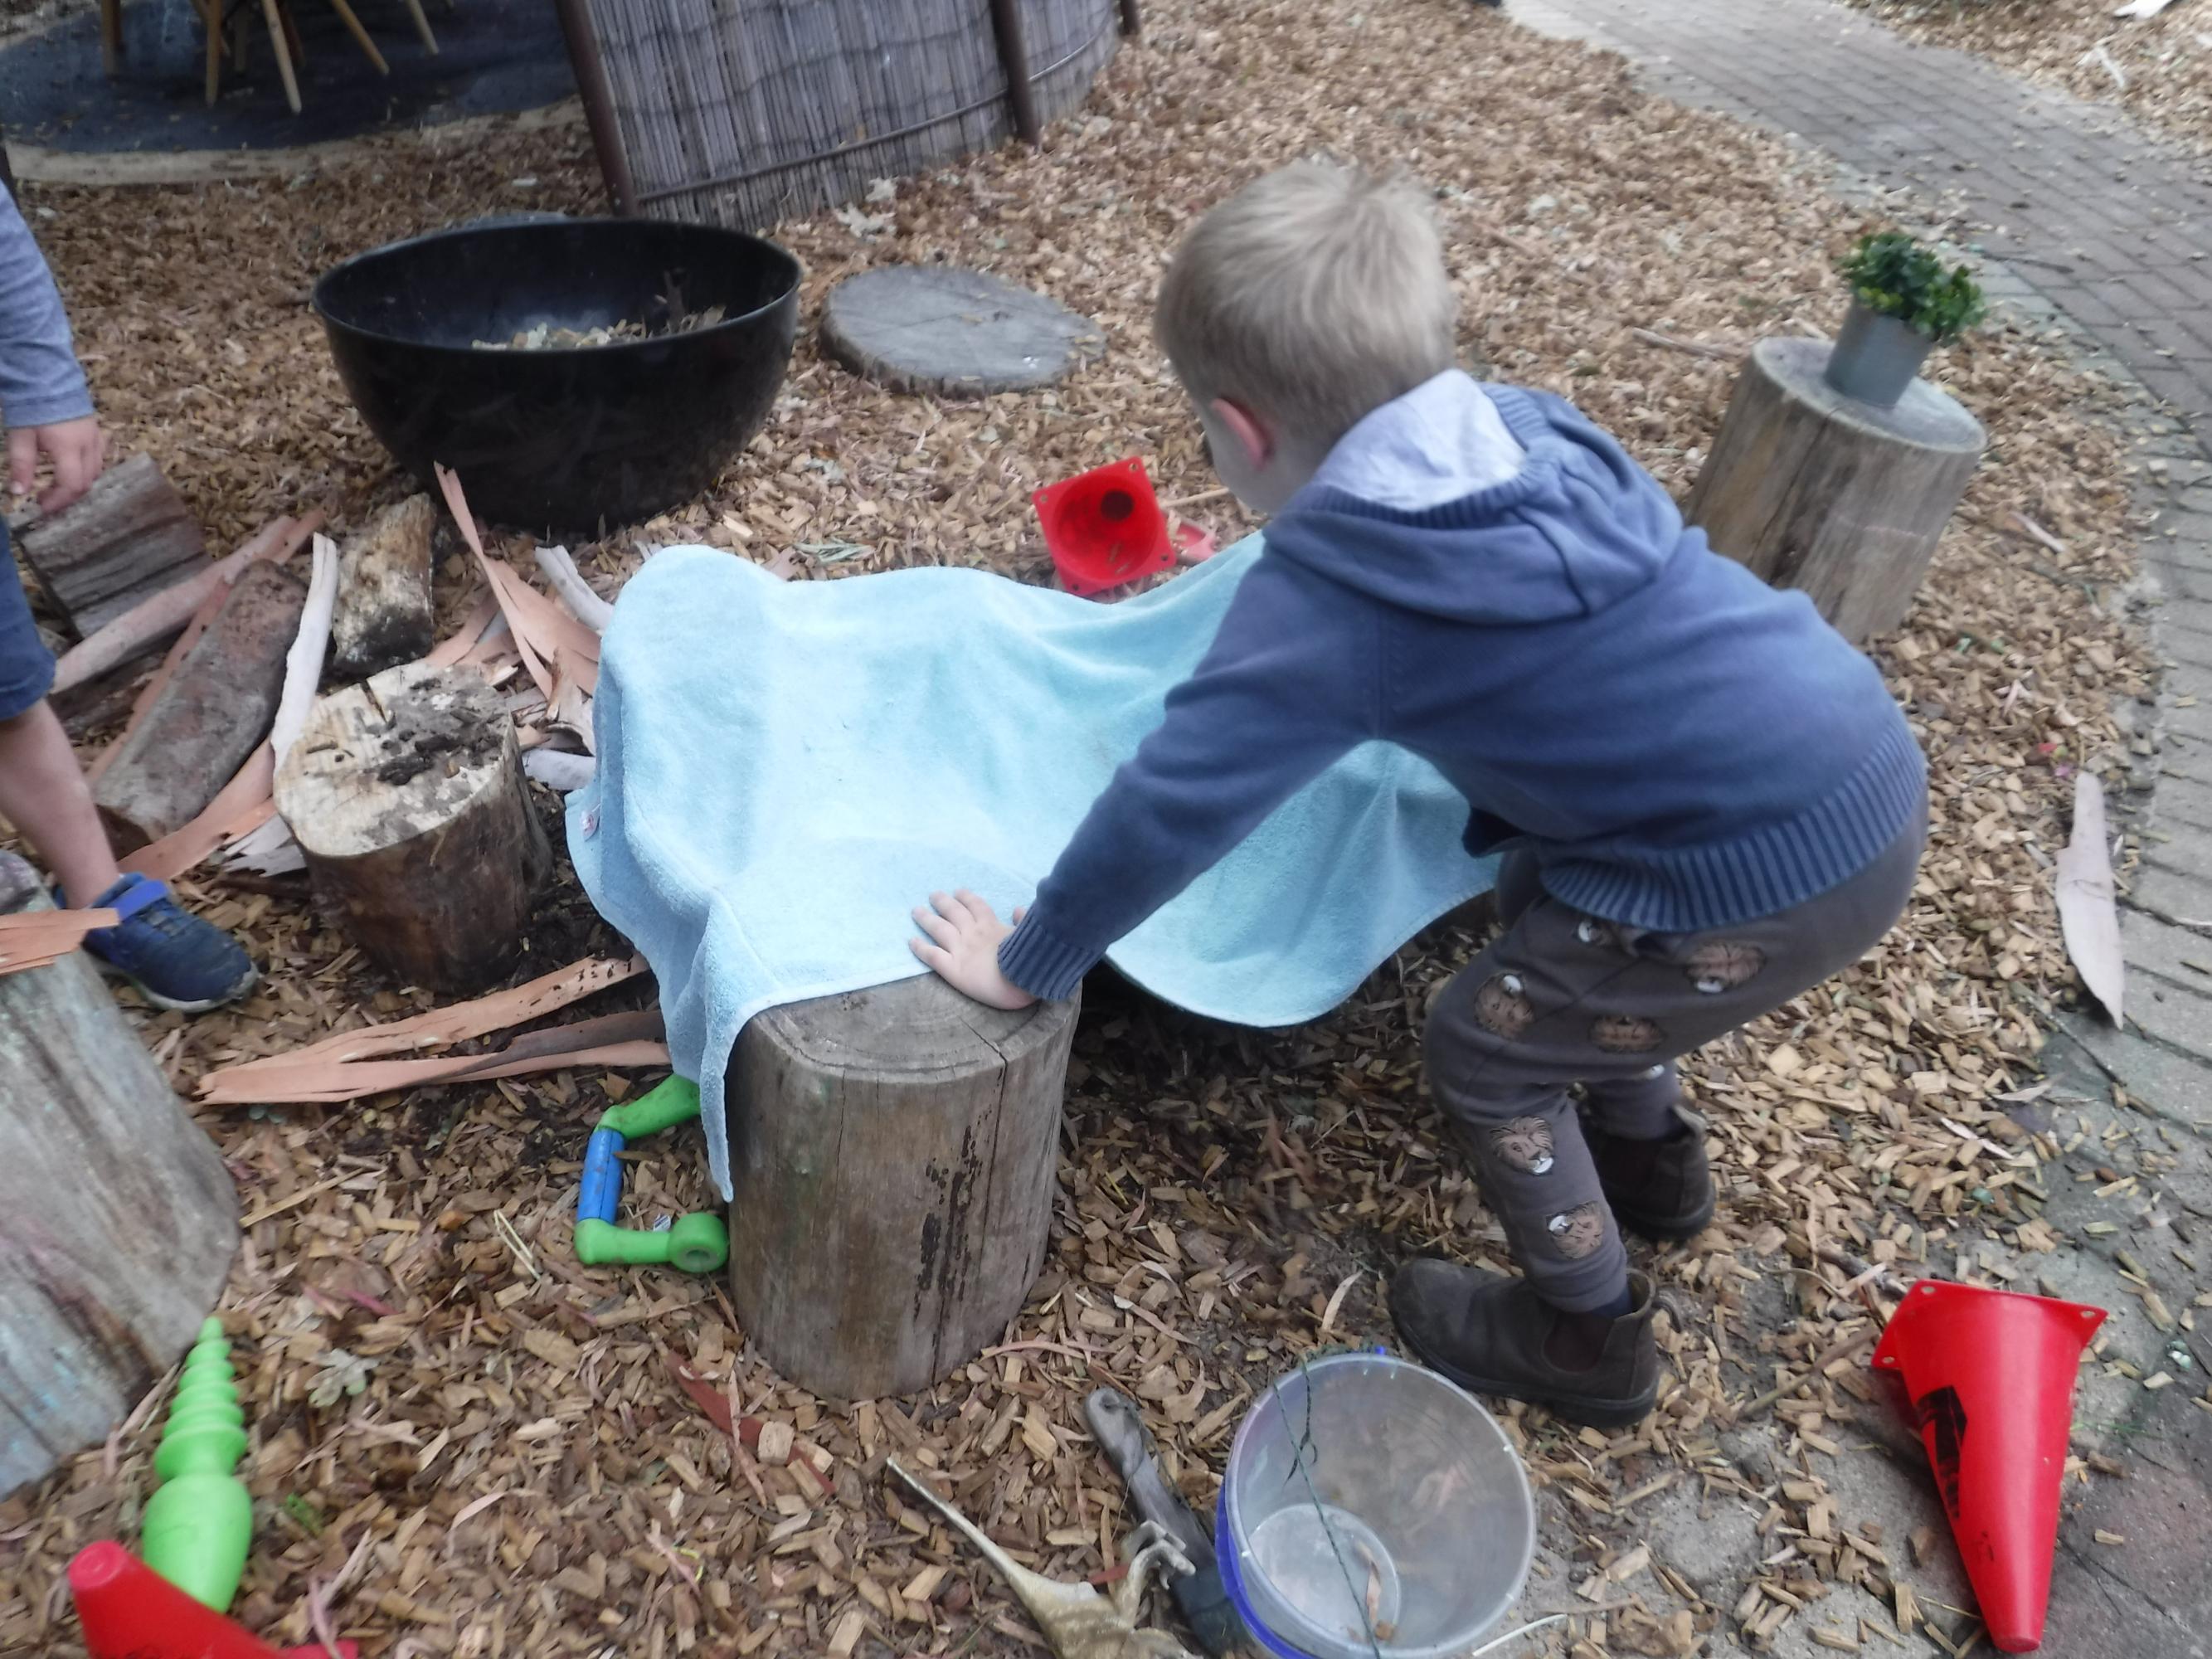 loose parts play, children playing with wood pieces from a tree